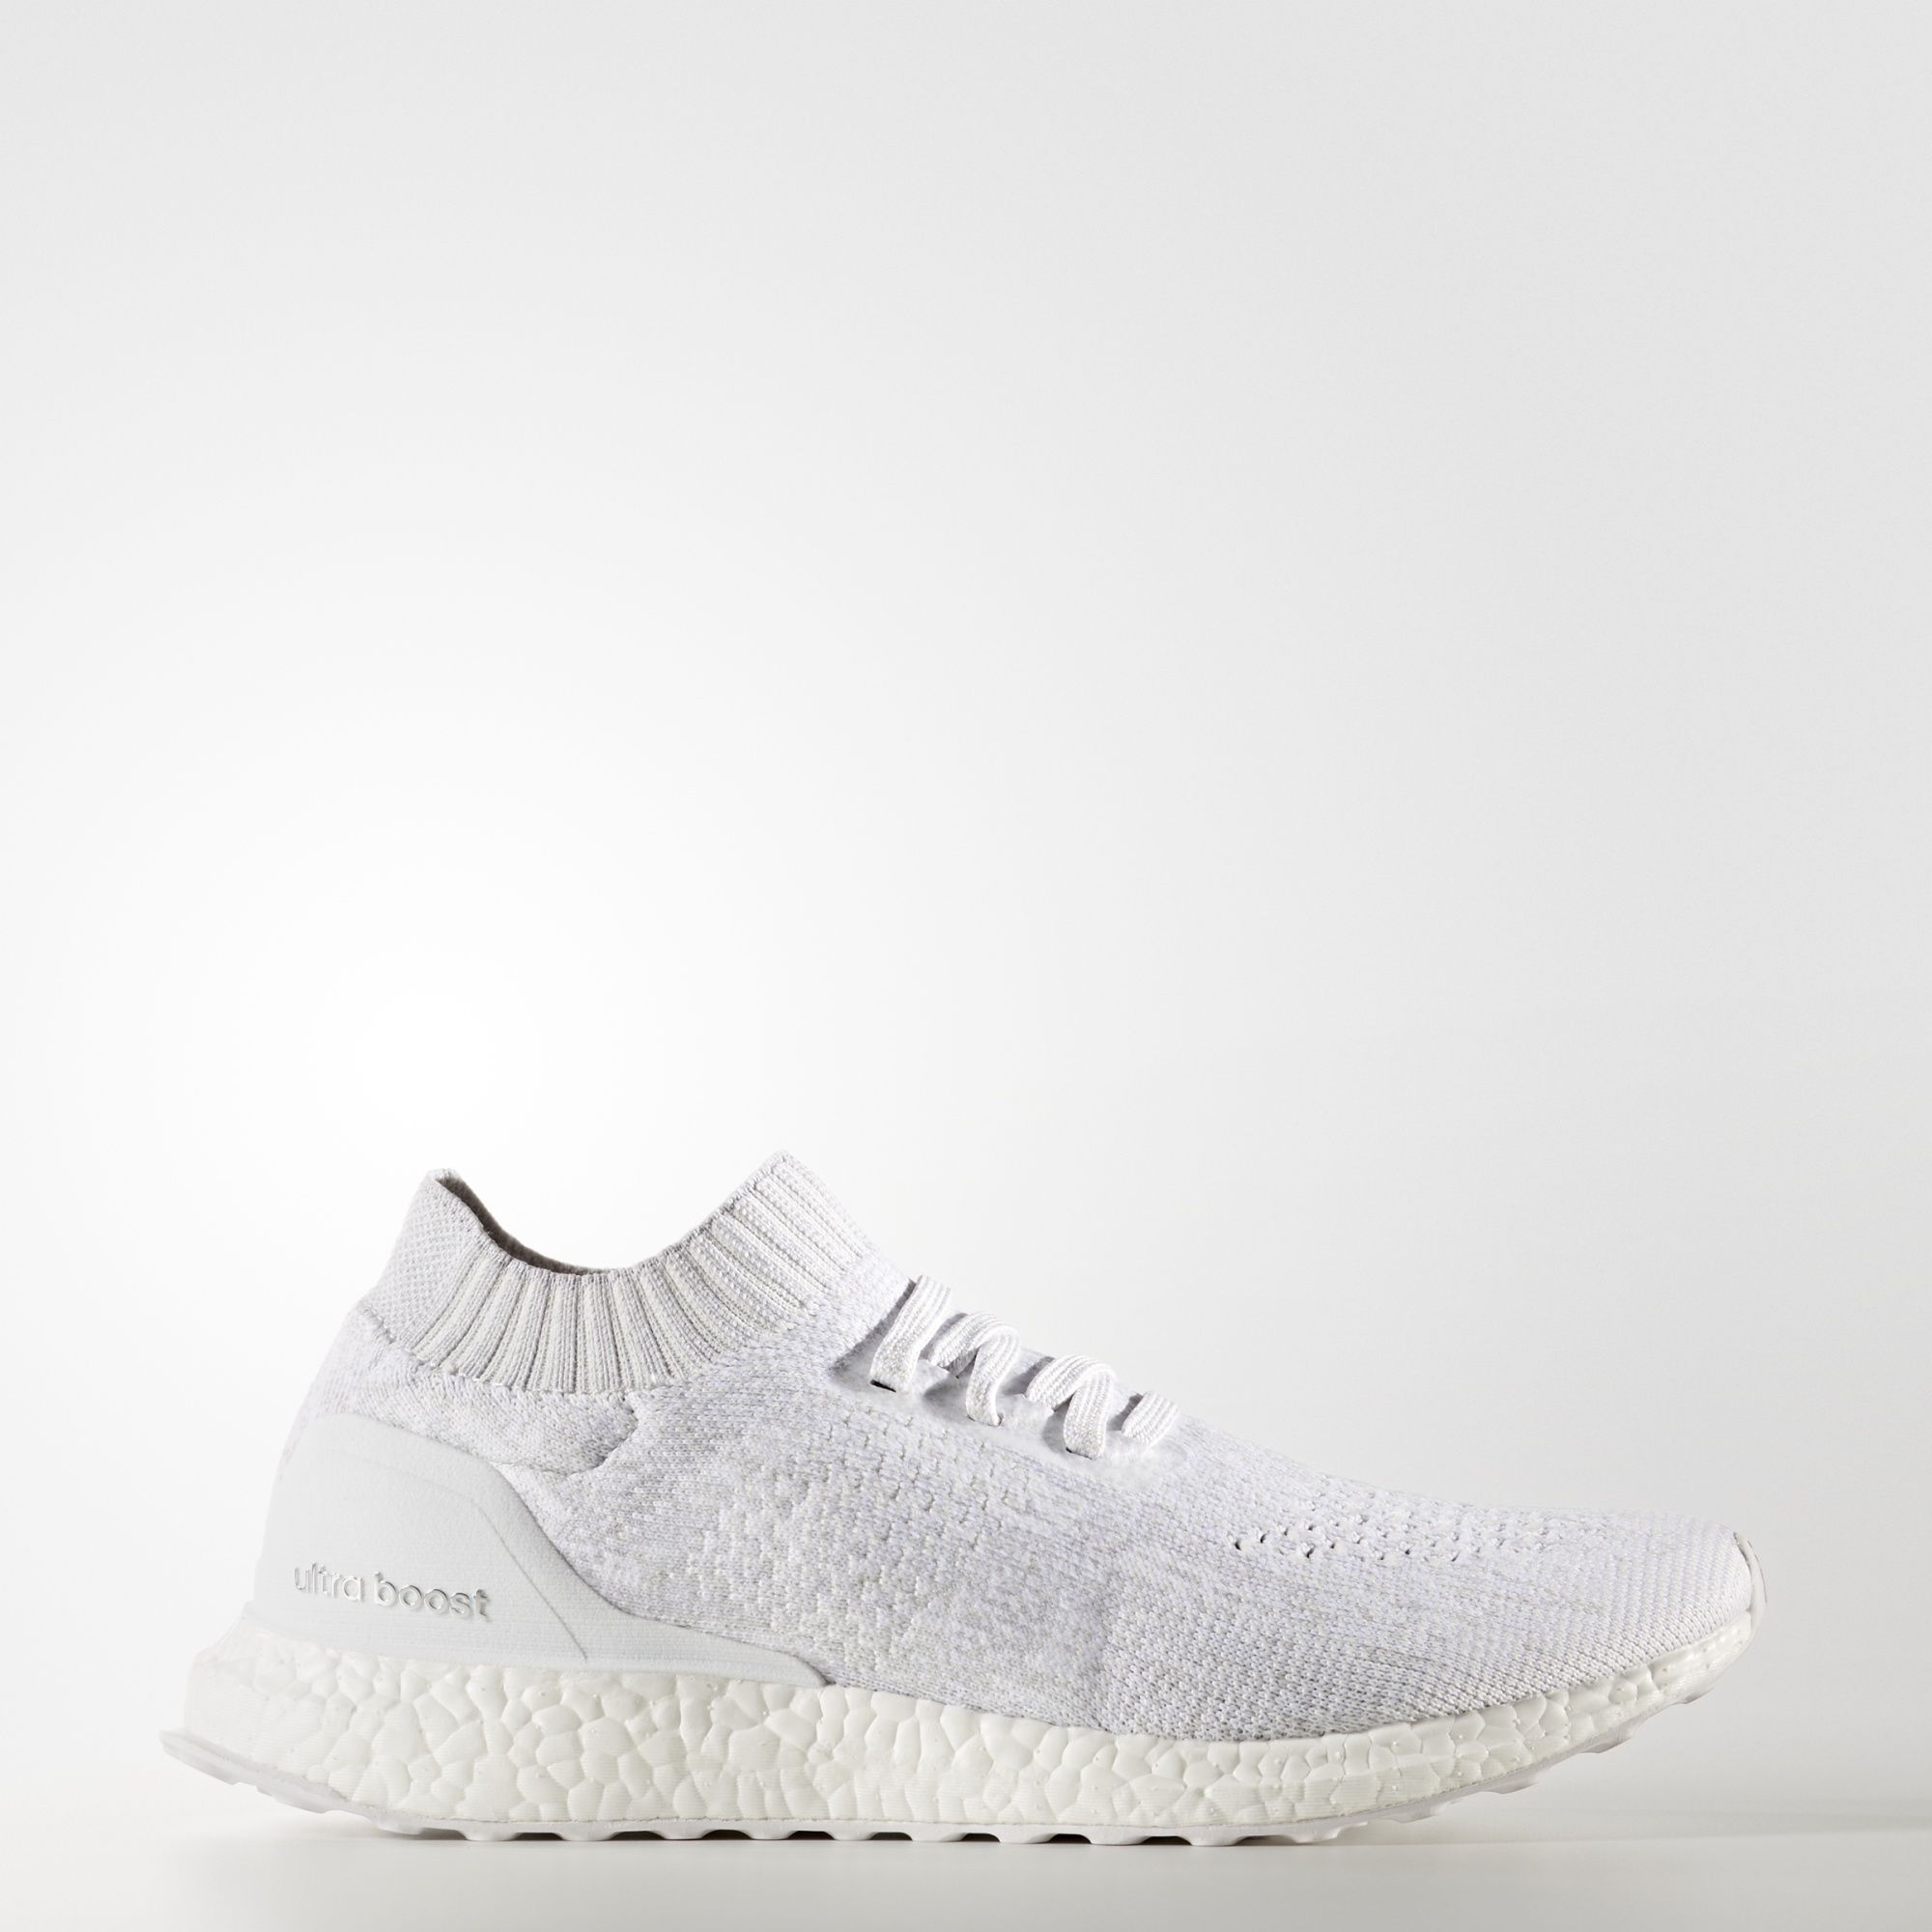 adidas-ultra-boost-uncaged-triple-white-2